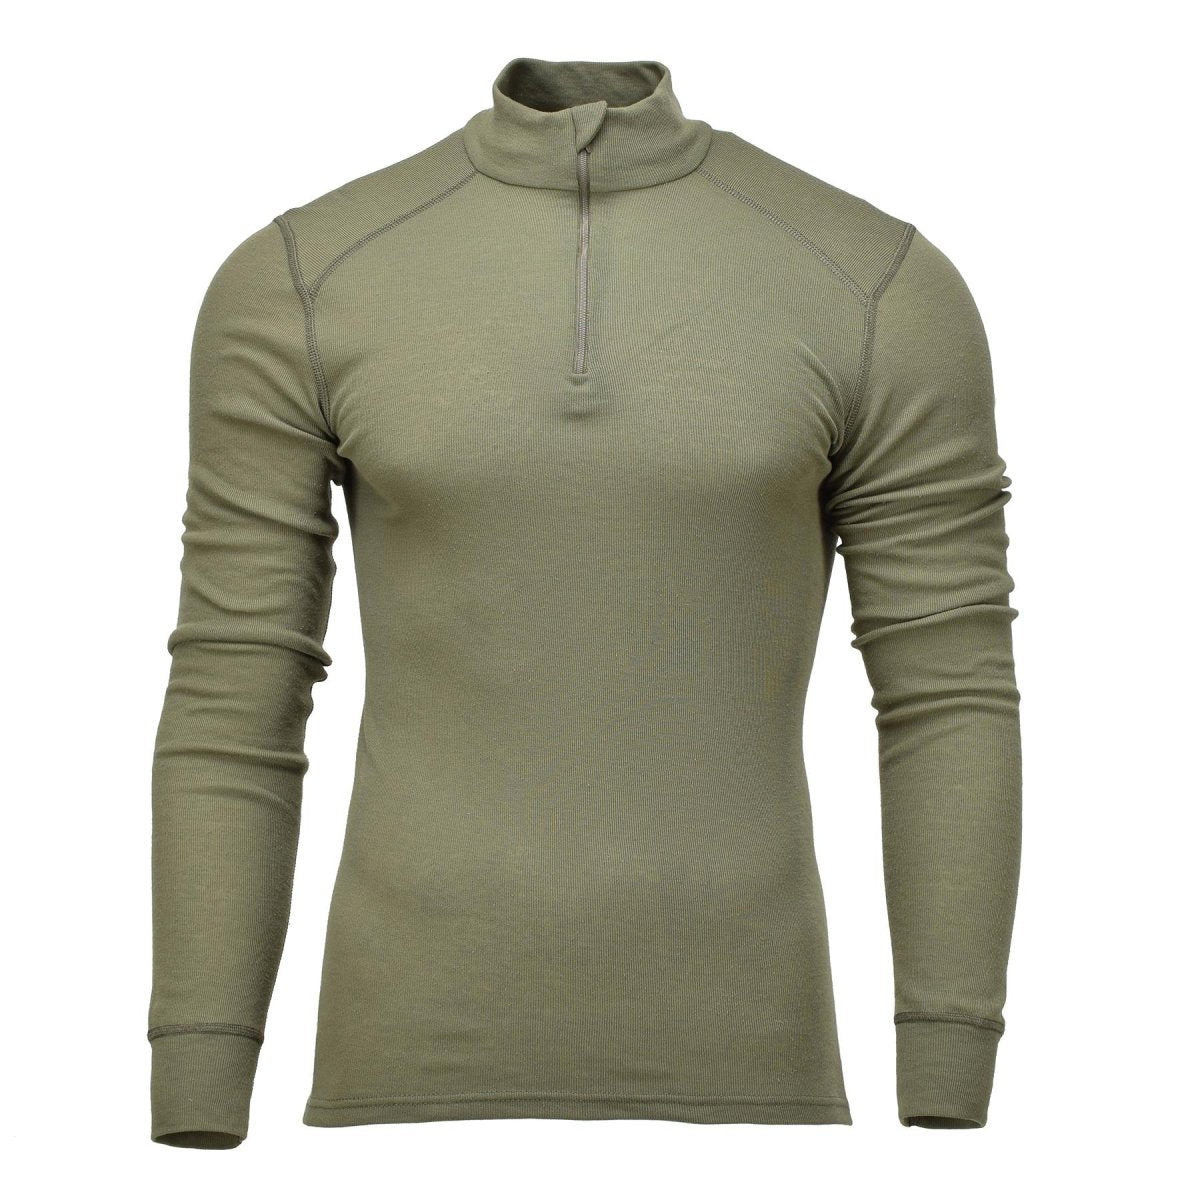 Dutch Army Long Johns Olive Drab - Grade 1 - Free Delivery